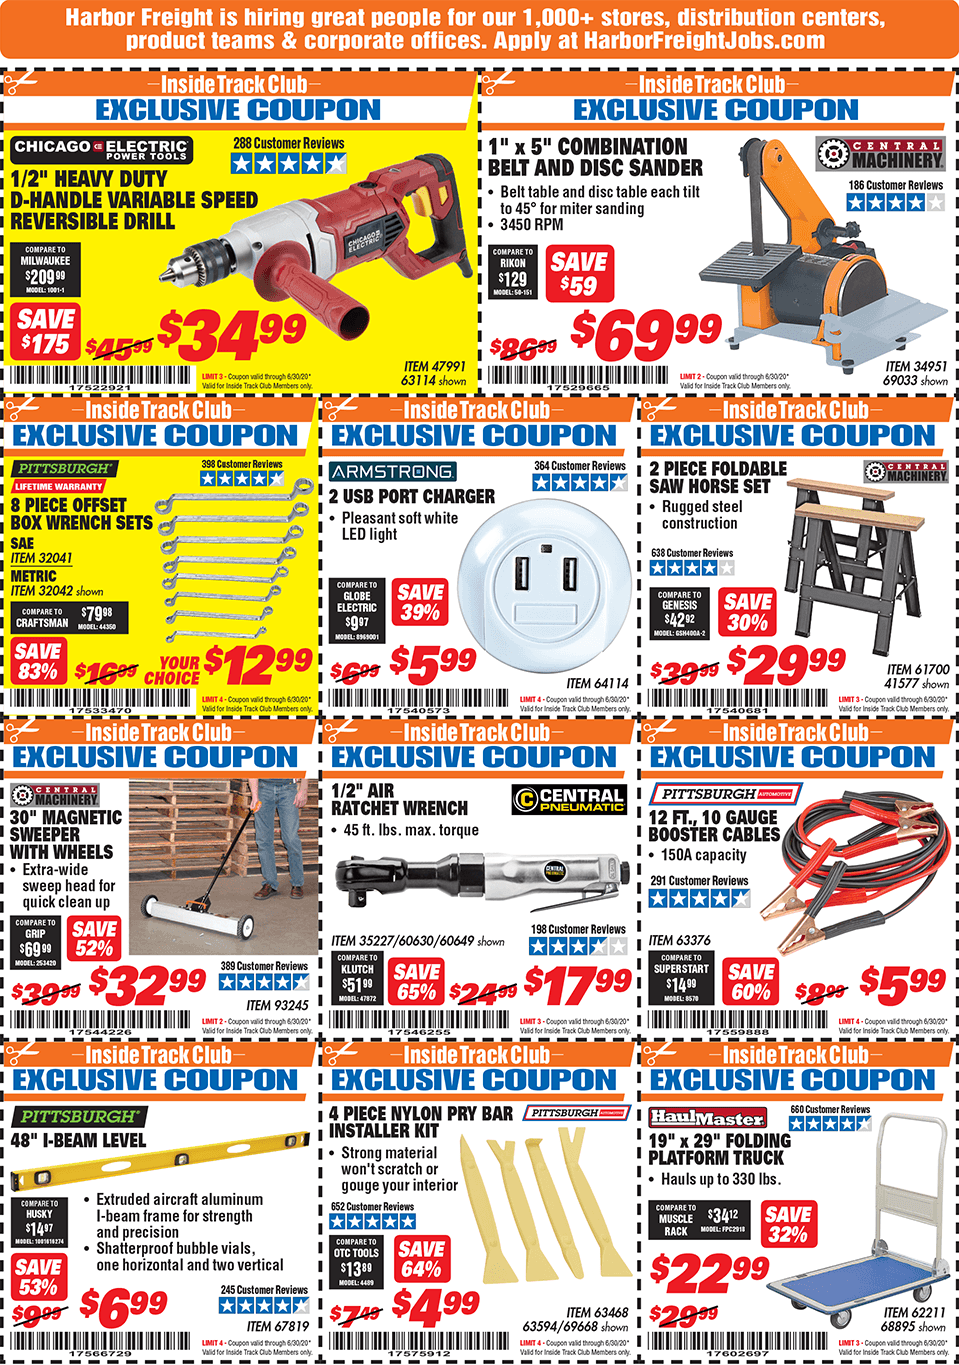 Harbor Freight Tools Coupon Database Inside Track Club Monthly Archives